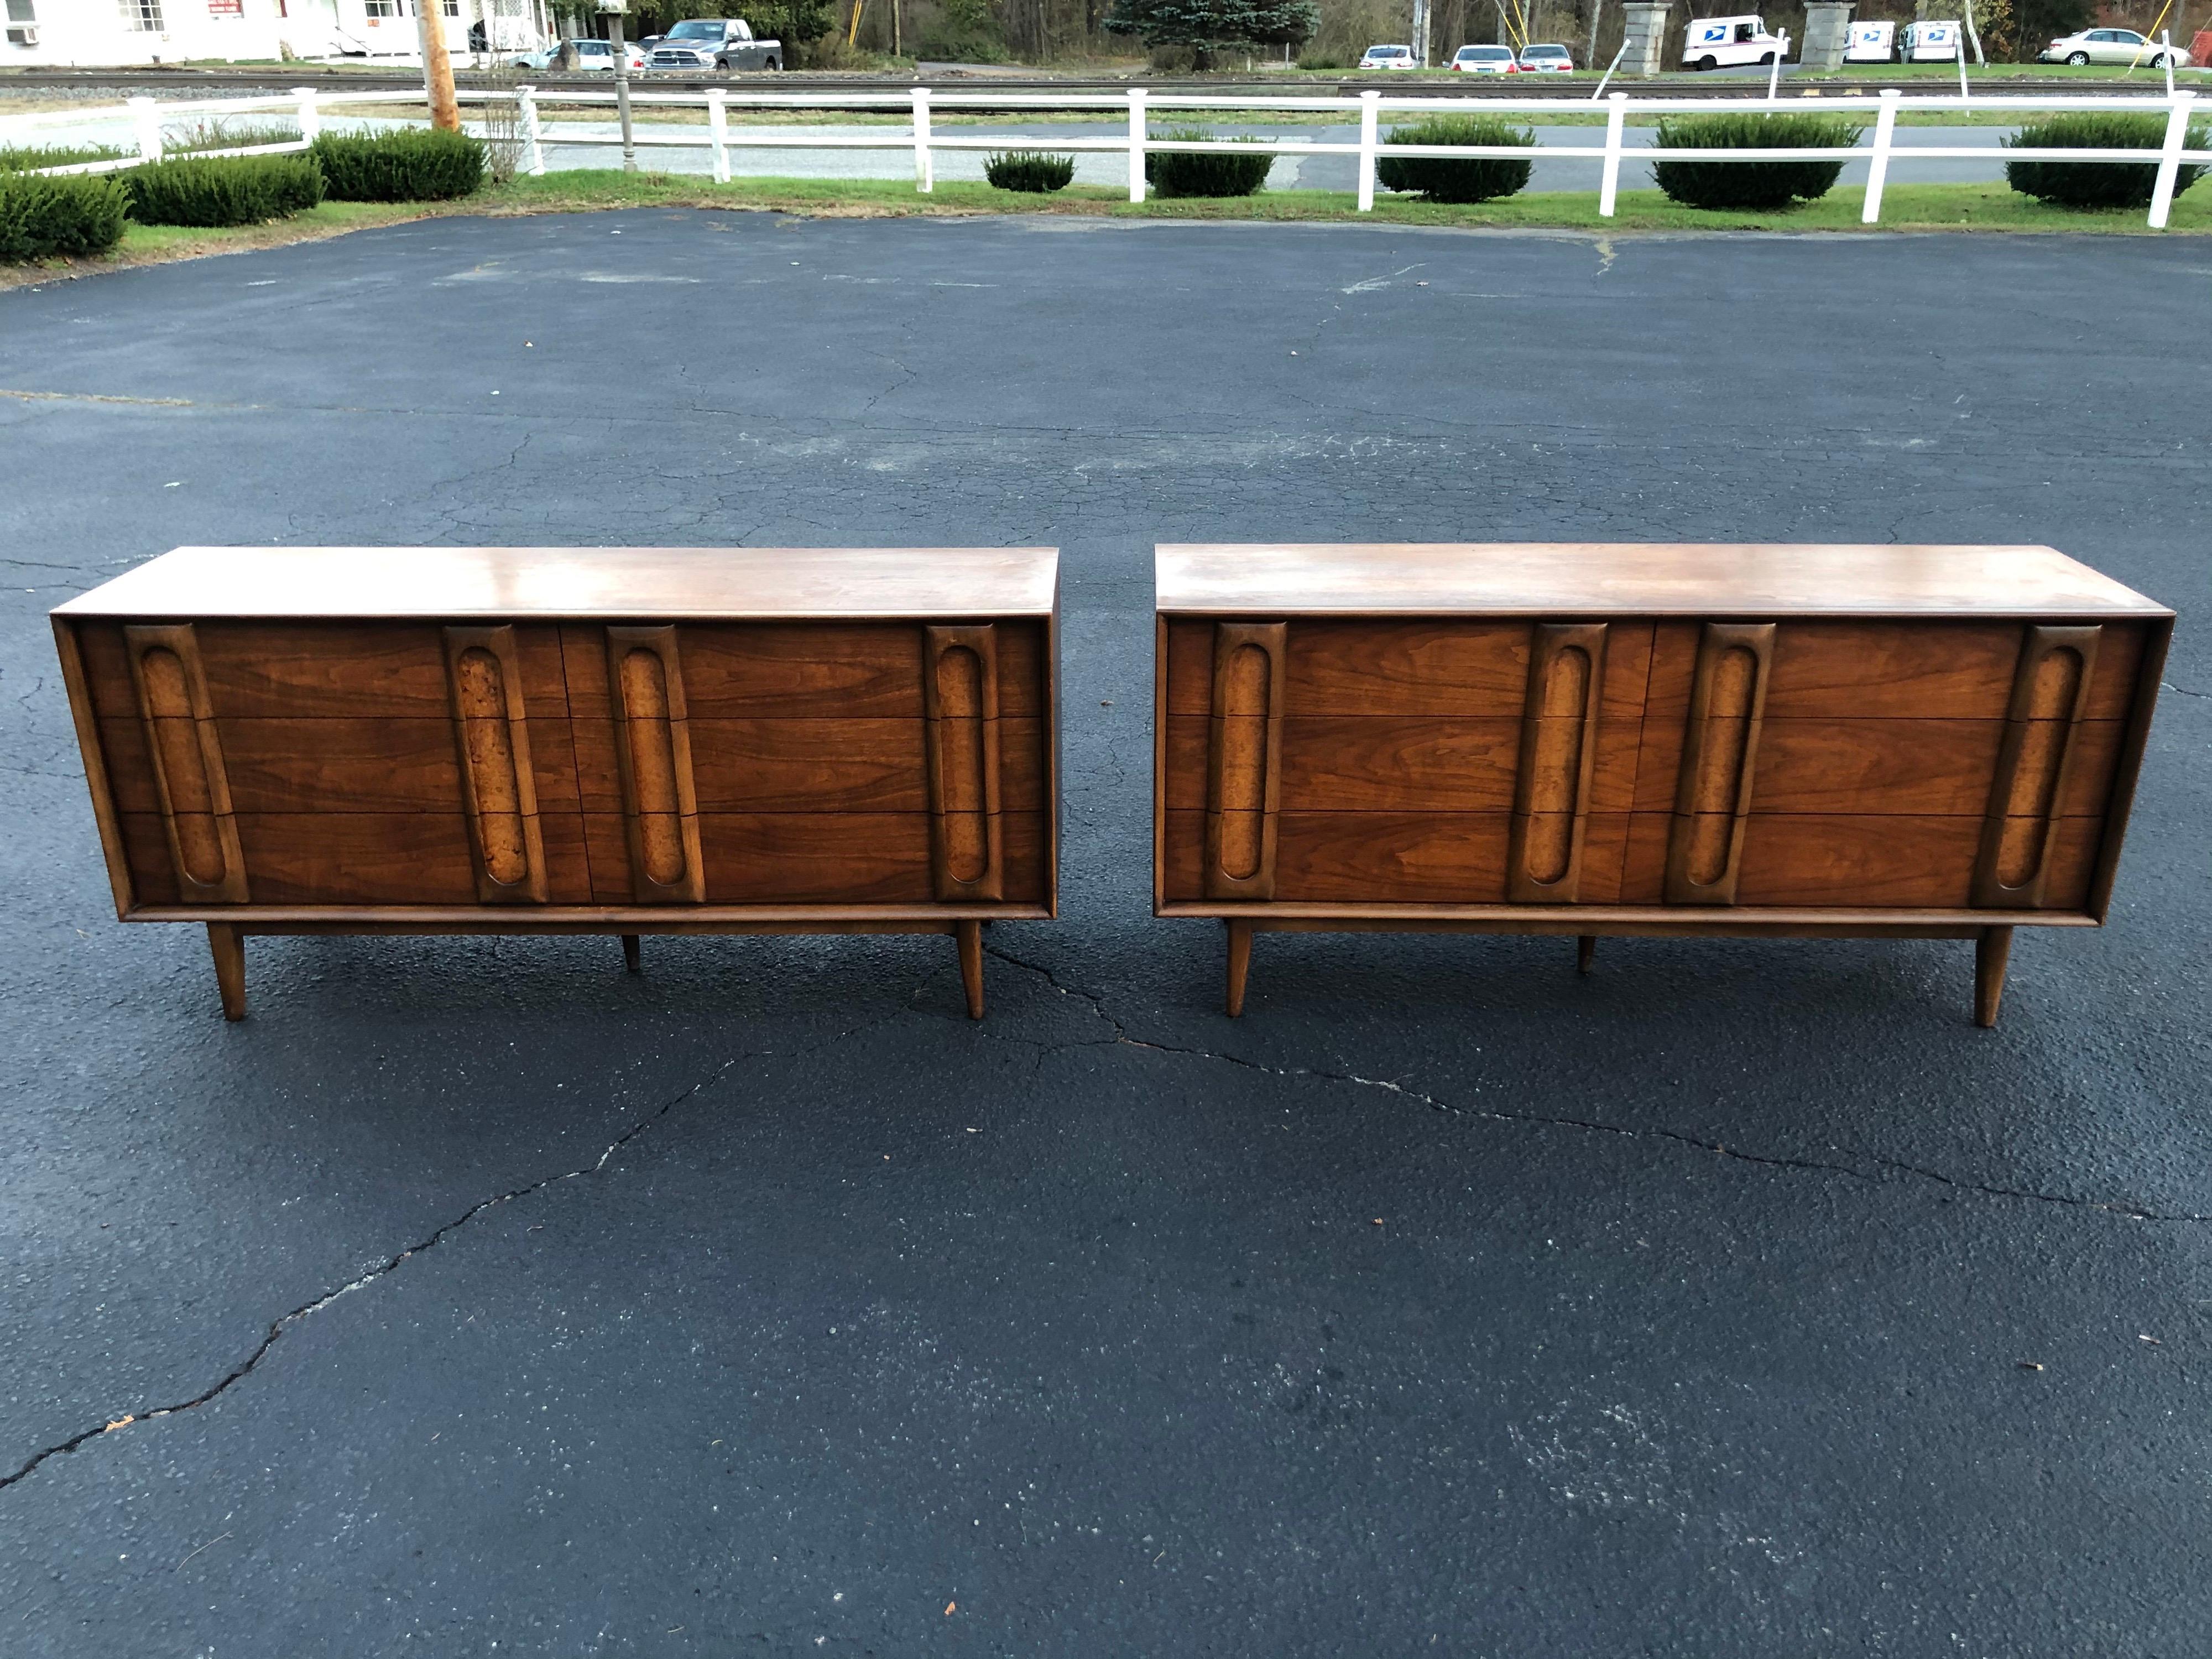 Pair of Mid-Century Modern dressers by Lane. Sculptural walnut dressers with a soft burl wood panel at the handles. Classic and timeless design. Use as a dresser or as a server /credenza. 6 drawers per dresser. We can break up the set if you want to